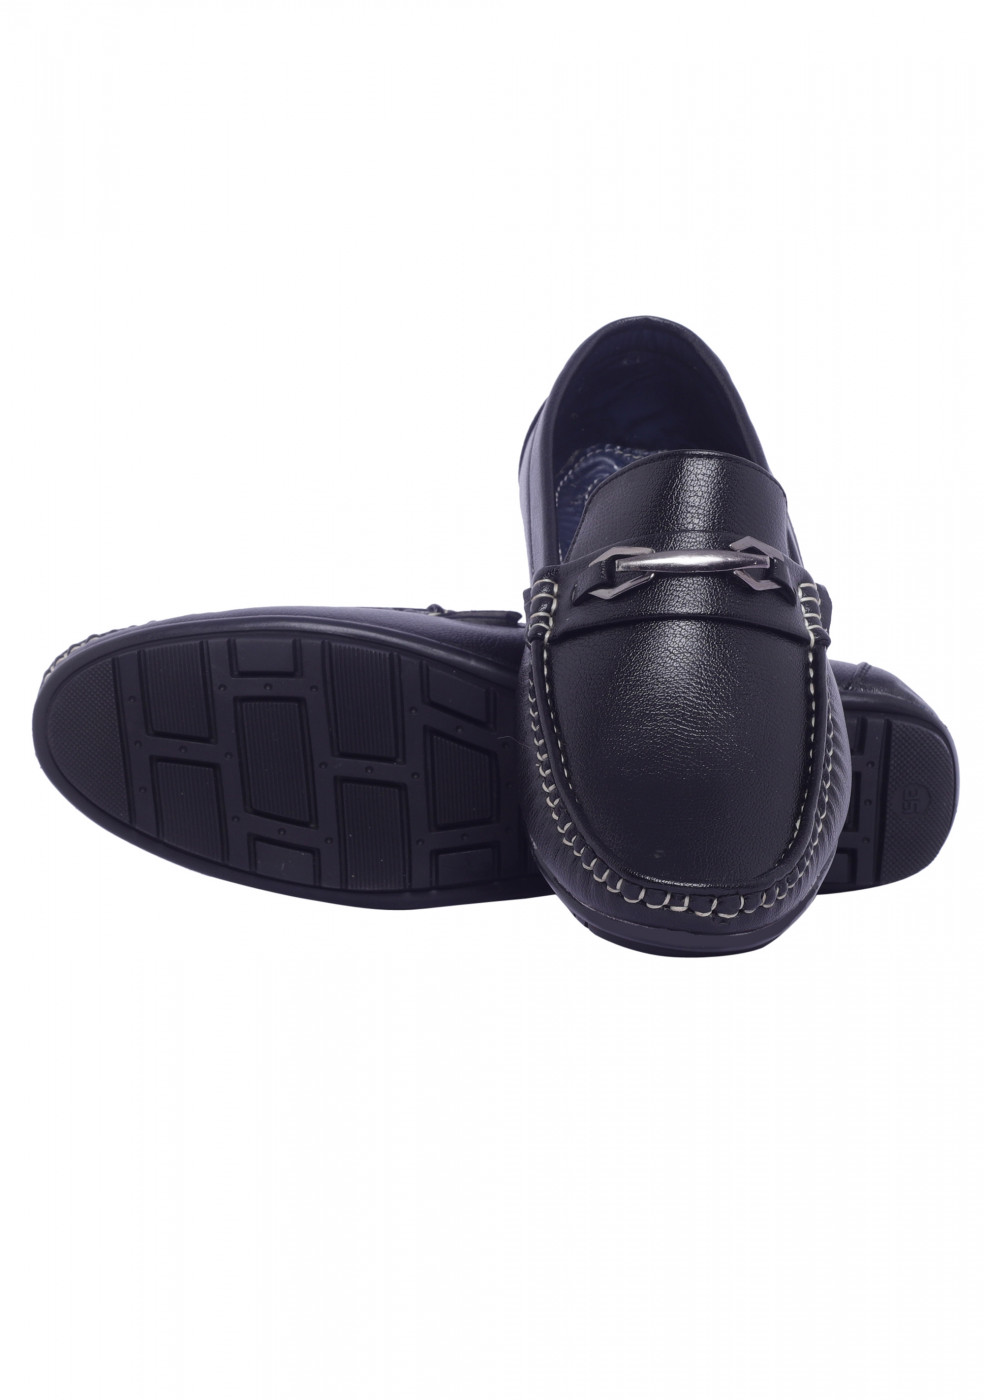 XSTOM Latest Black Casual Loafers For Men